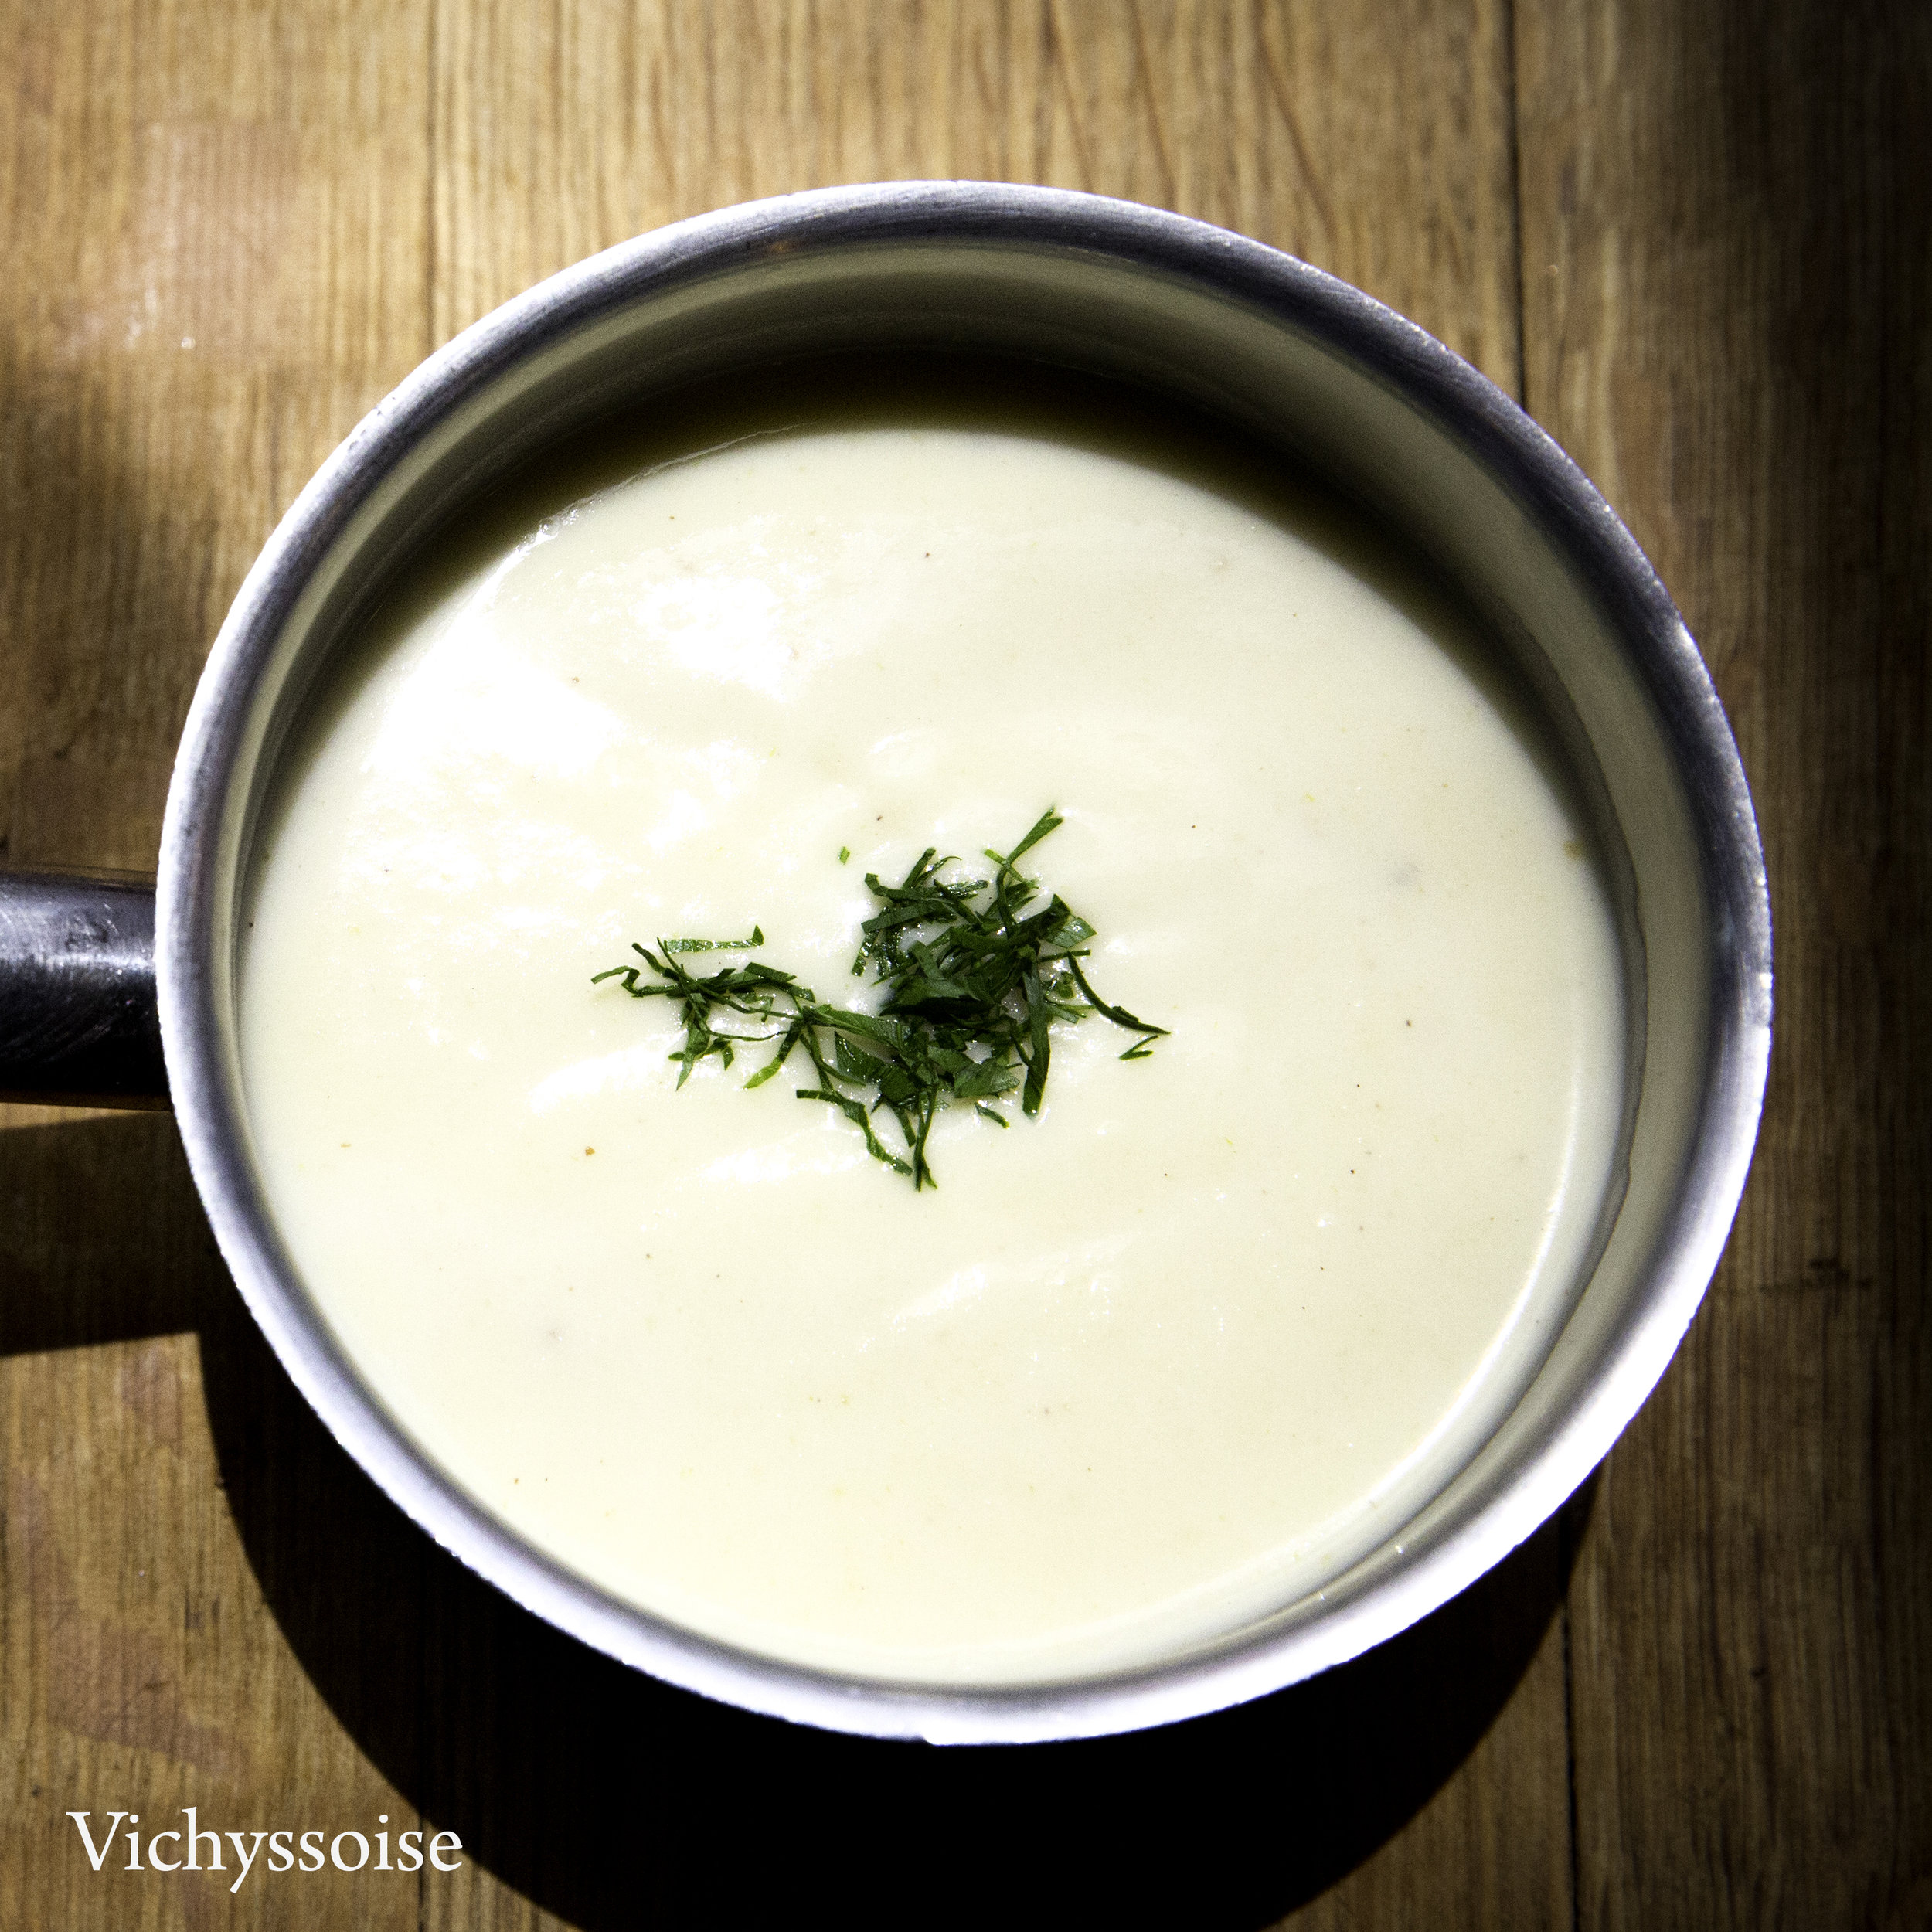 Products-Vichyssoise.jpg